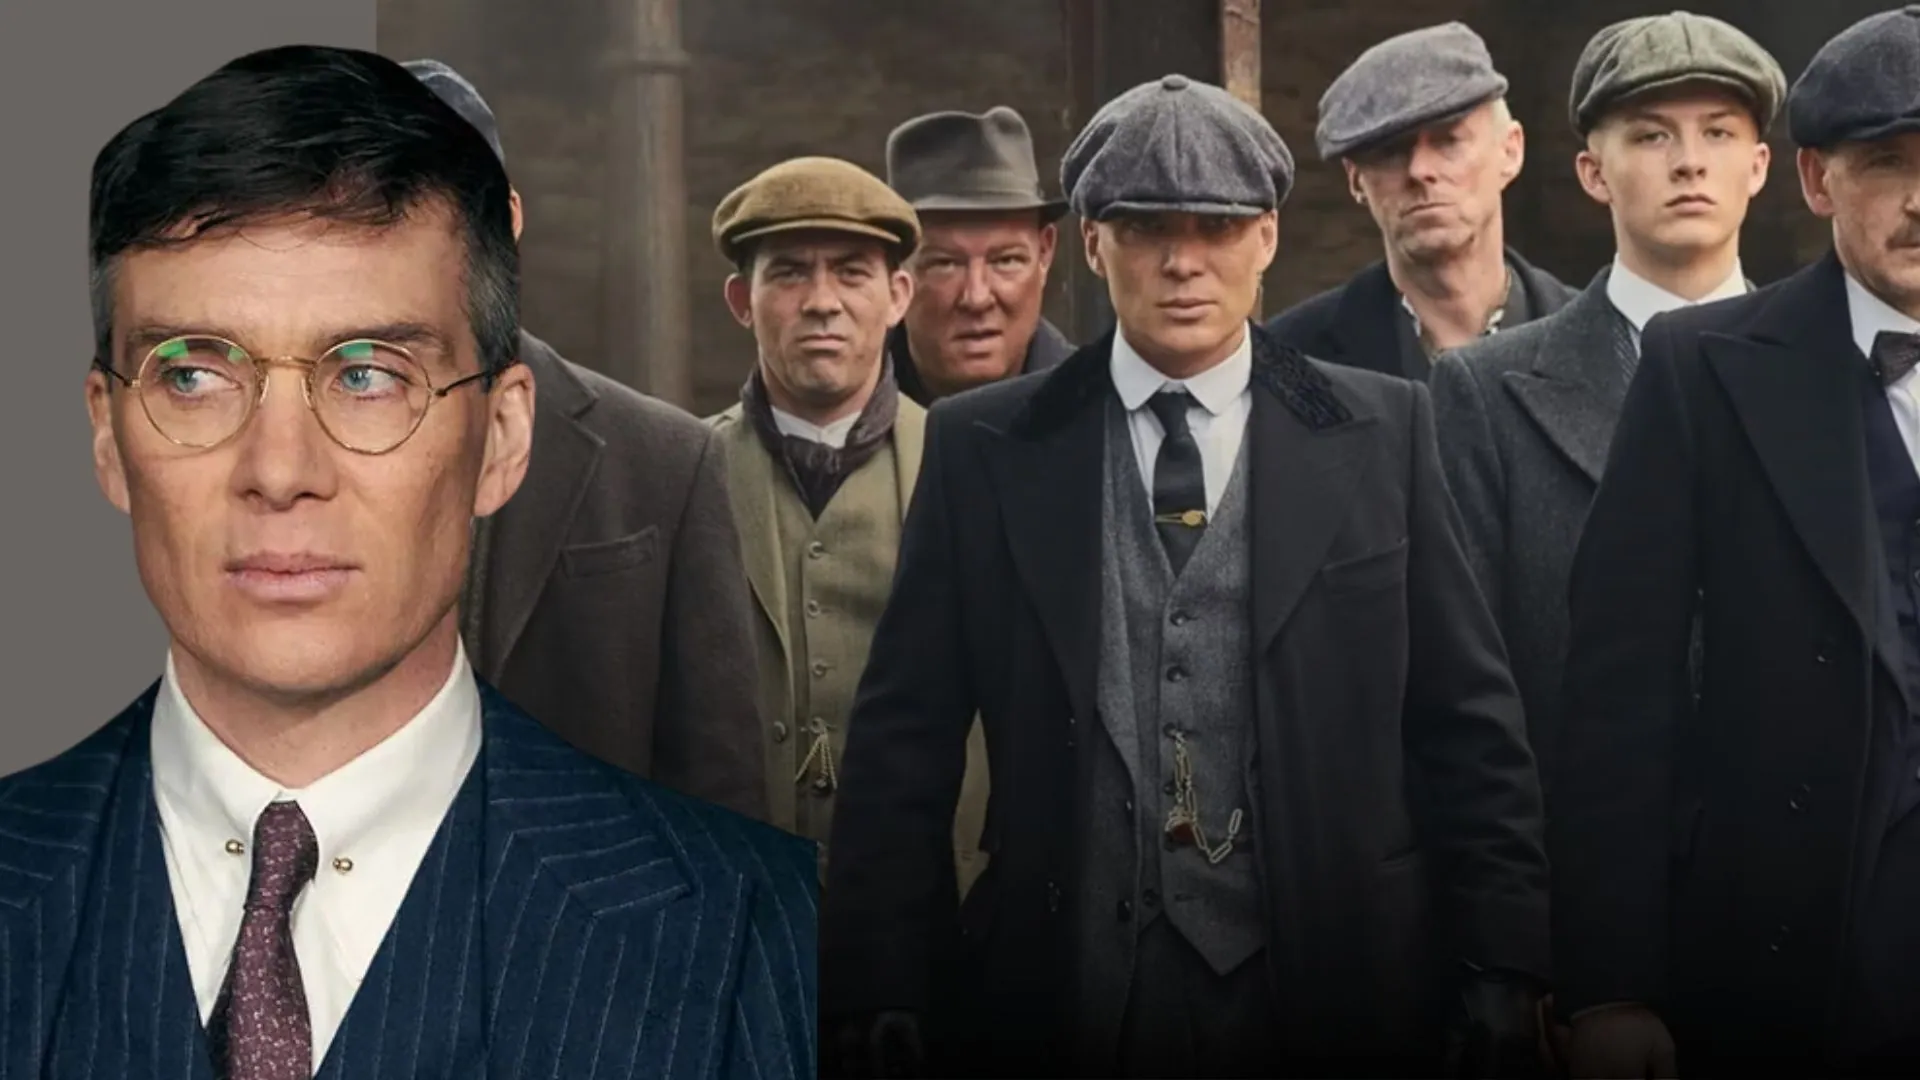 Cillian Murphy is back with the new film Peaky Blinders